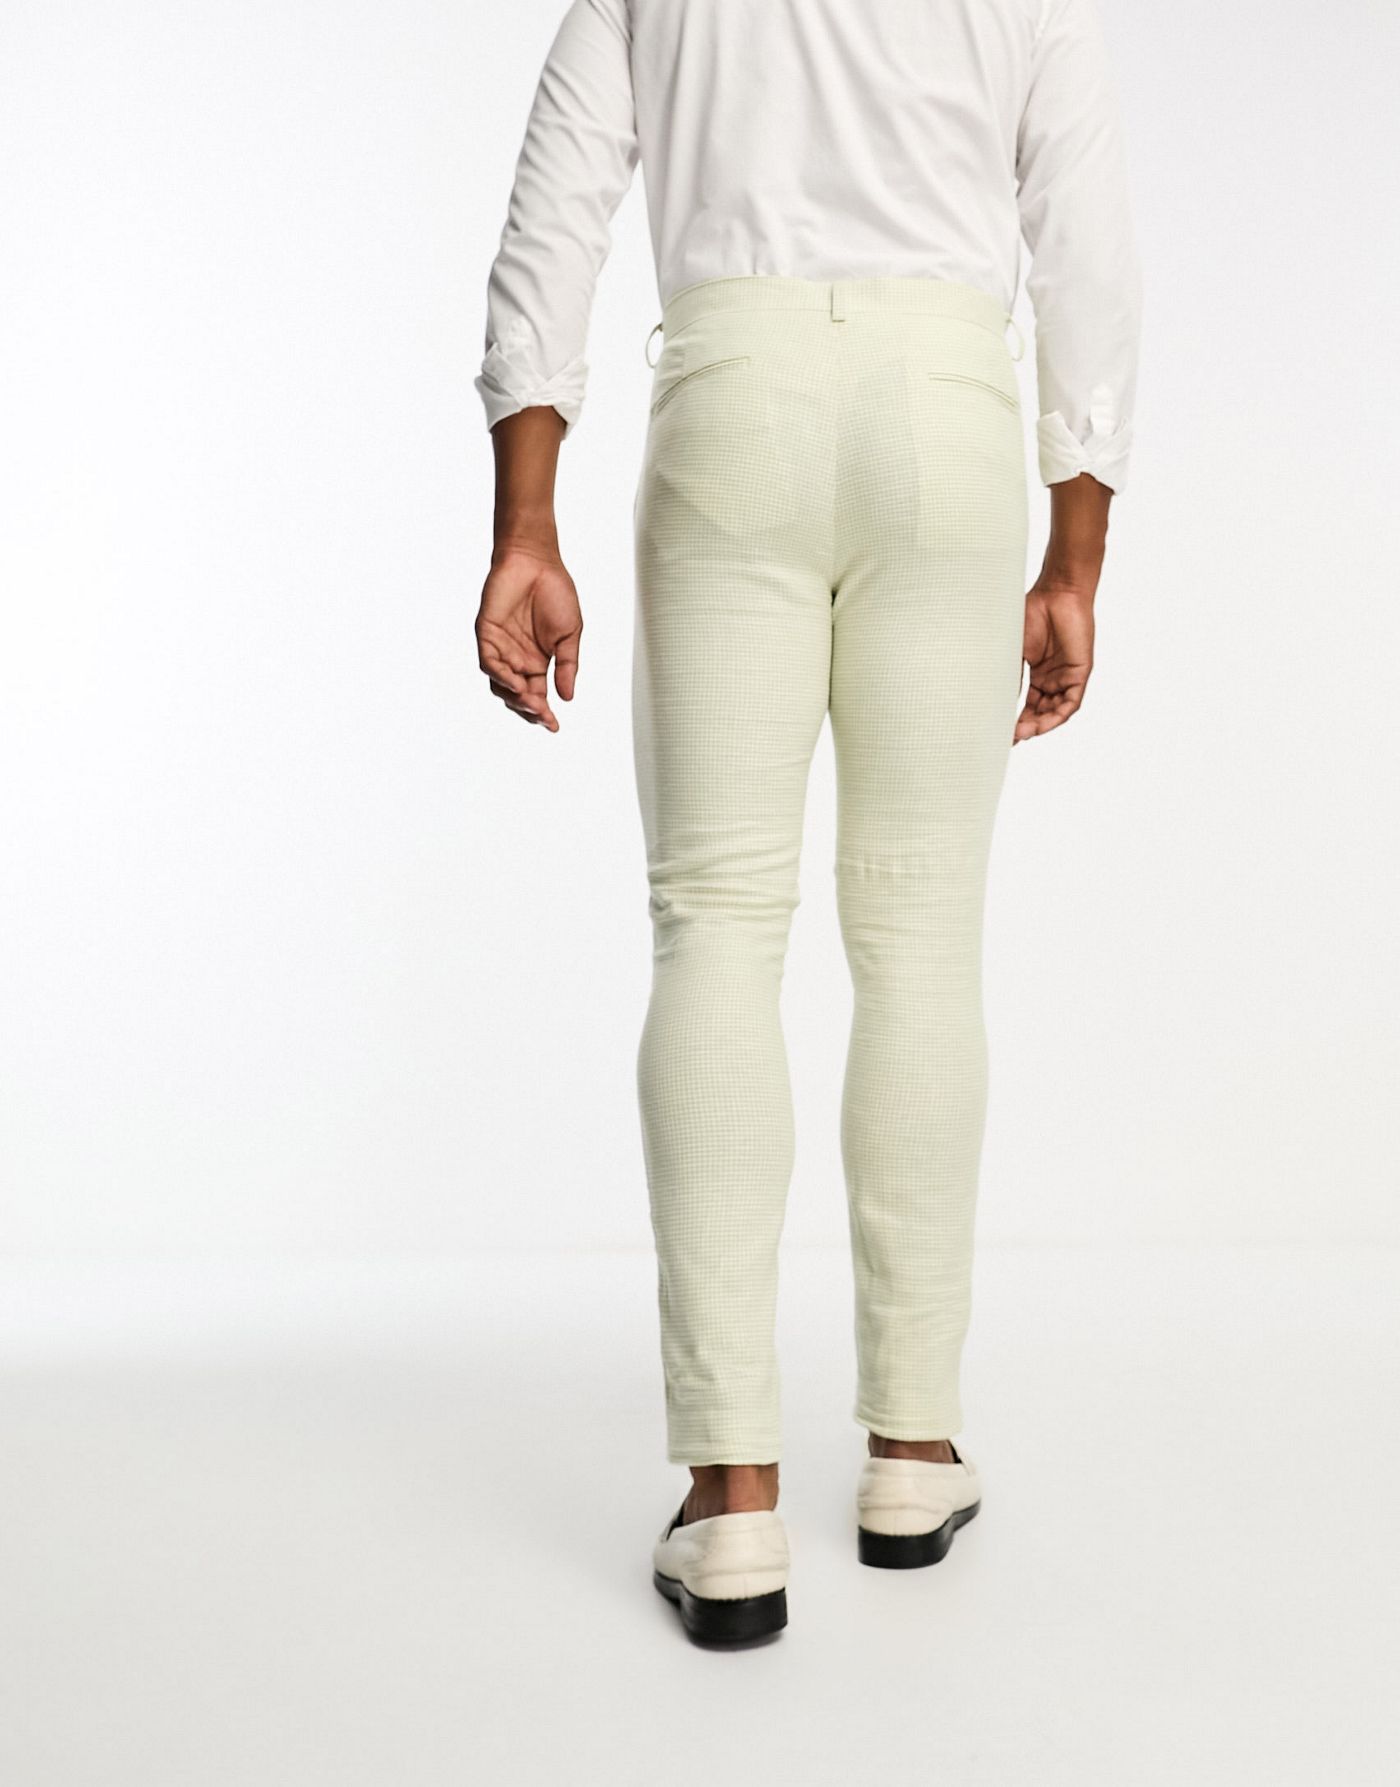 ASOS DESIGN super skinny suit trouser in linen mix in puppytooth check in green